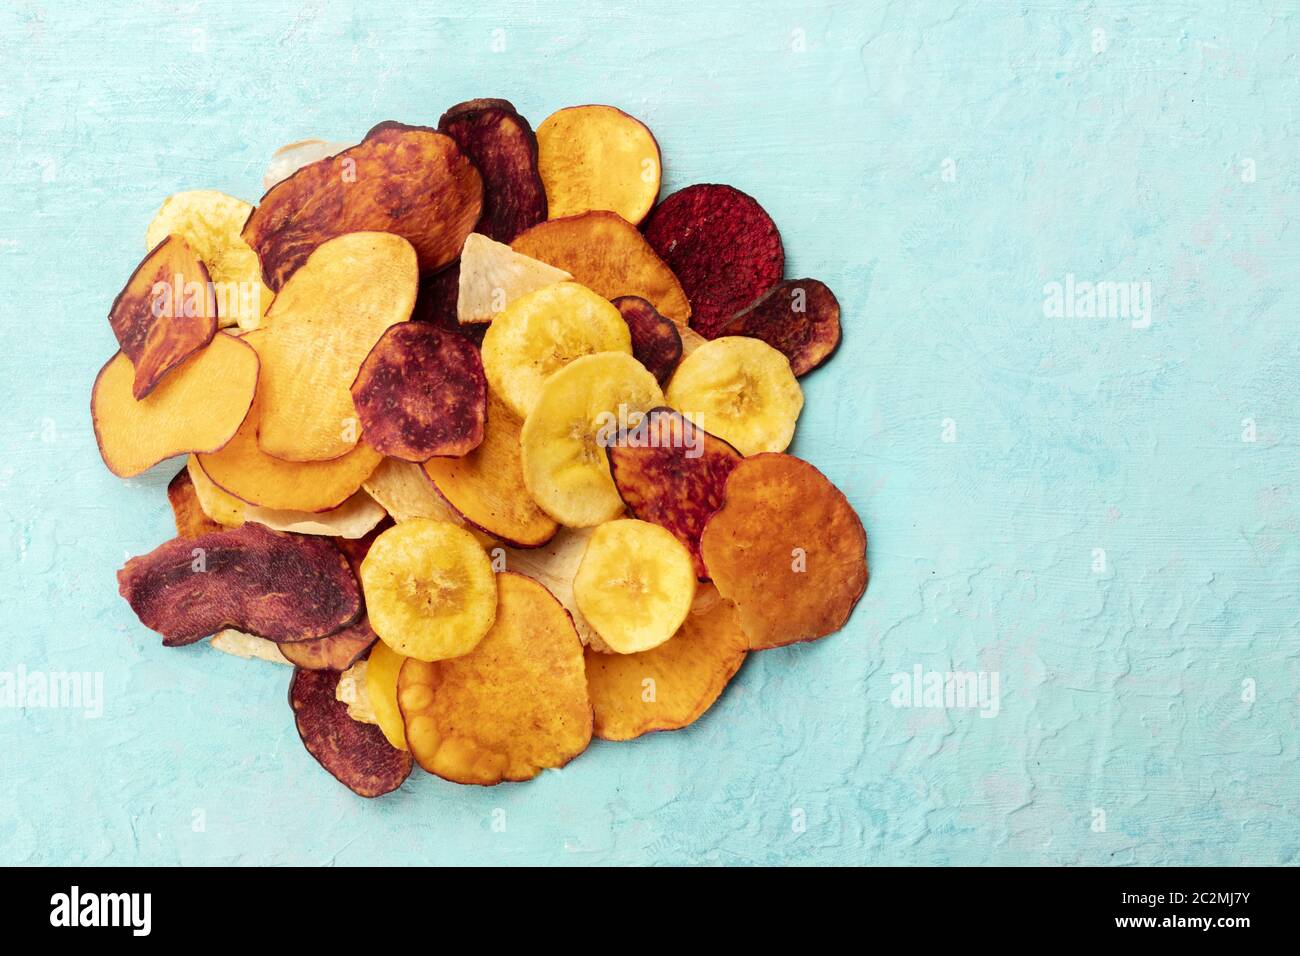 Dried fruit and vegetable chips, healthy vegan snack, a mixed heap on a teal background, top shot with a place for text Stock Photo